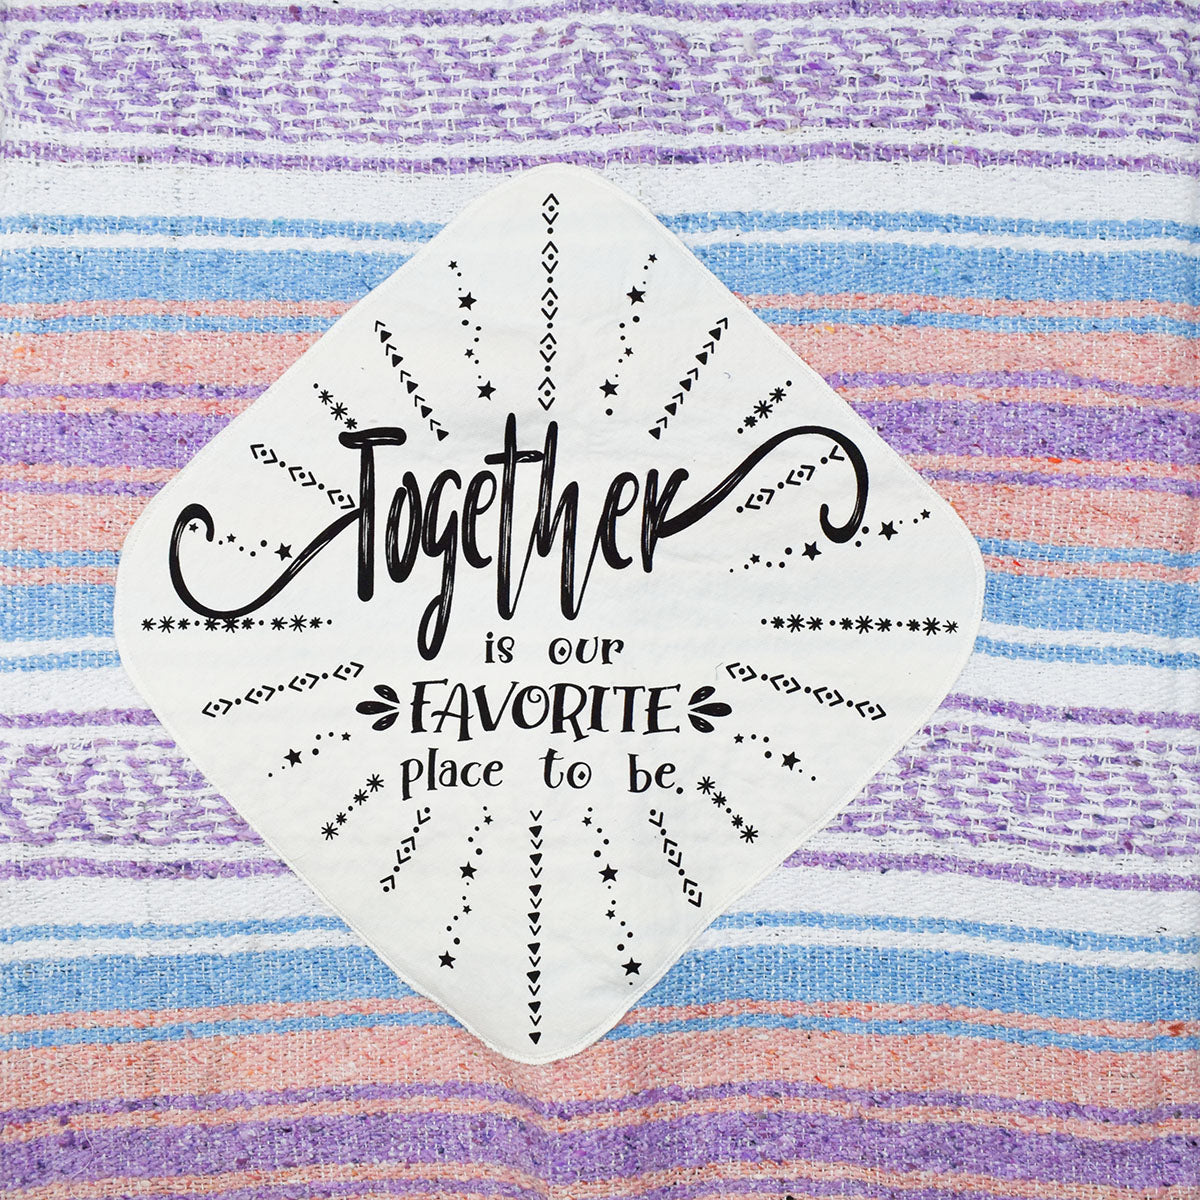 Closer view of patch "Togetherness is our Favorite Place to Be" from Mexican Blanket